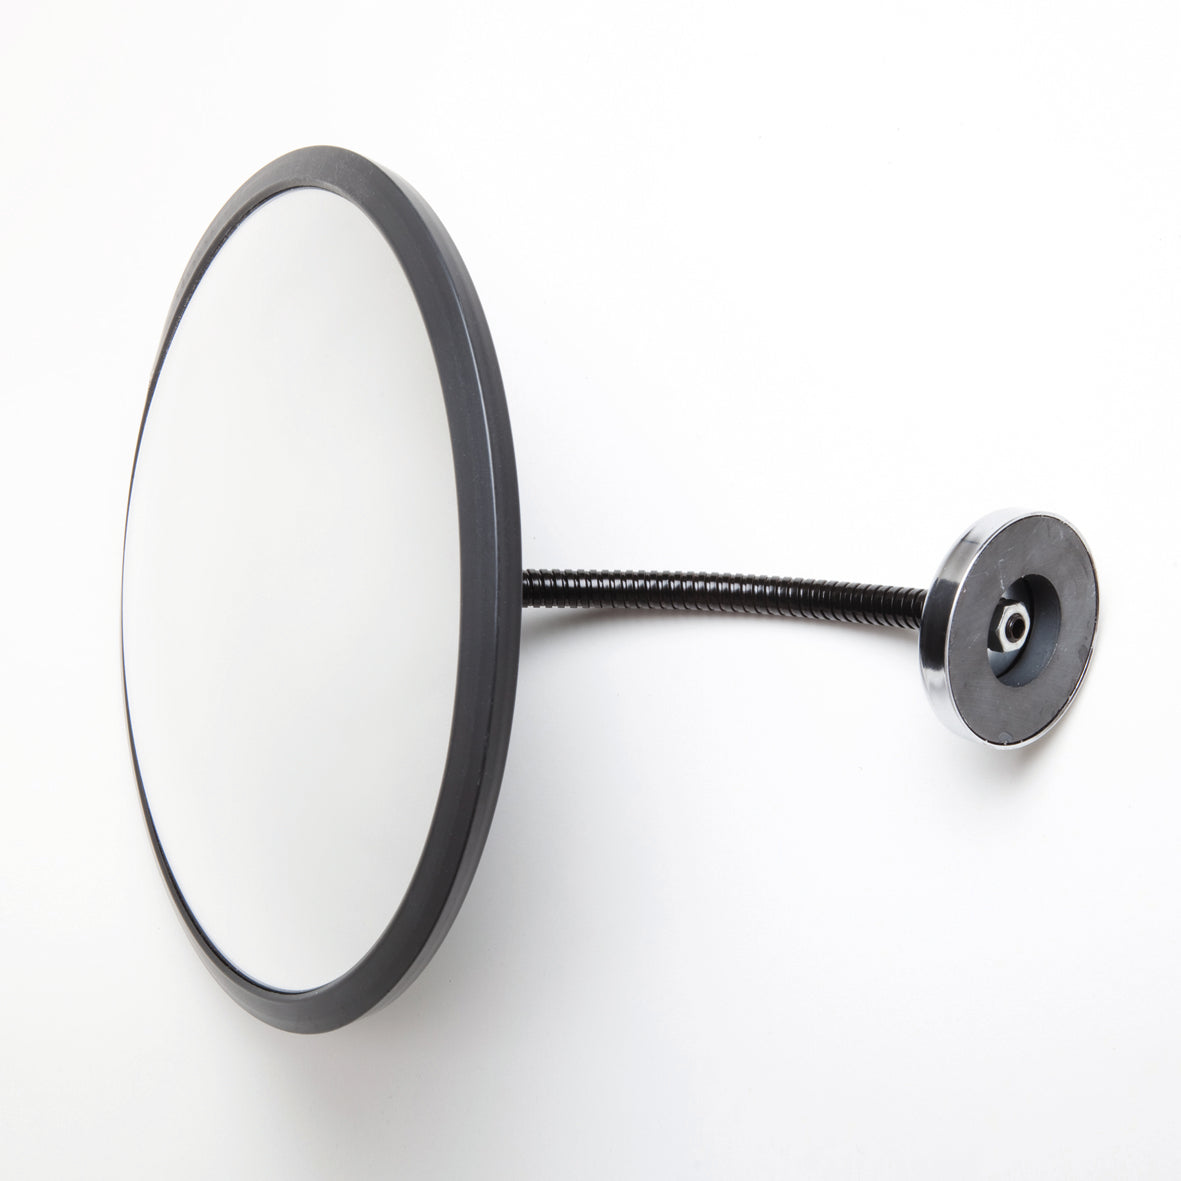 Detective Convex Industrial Mirror with Magnetic Arm